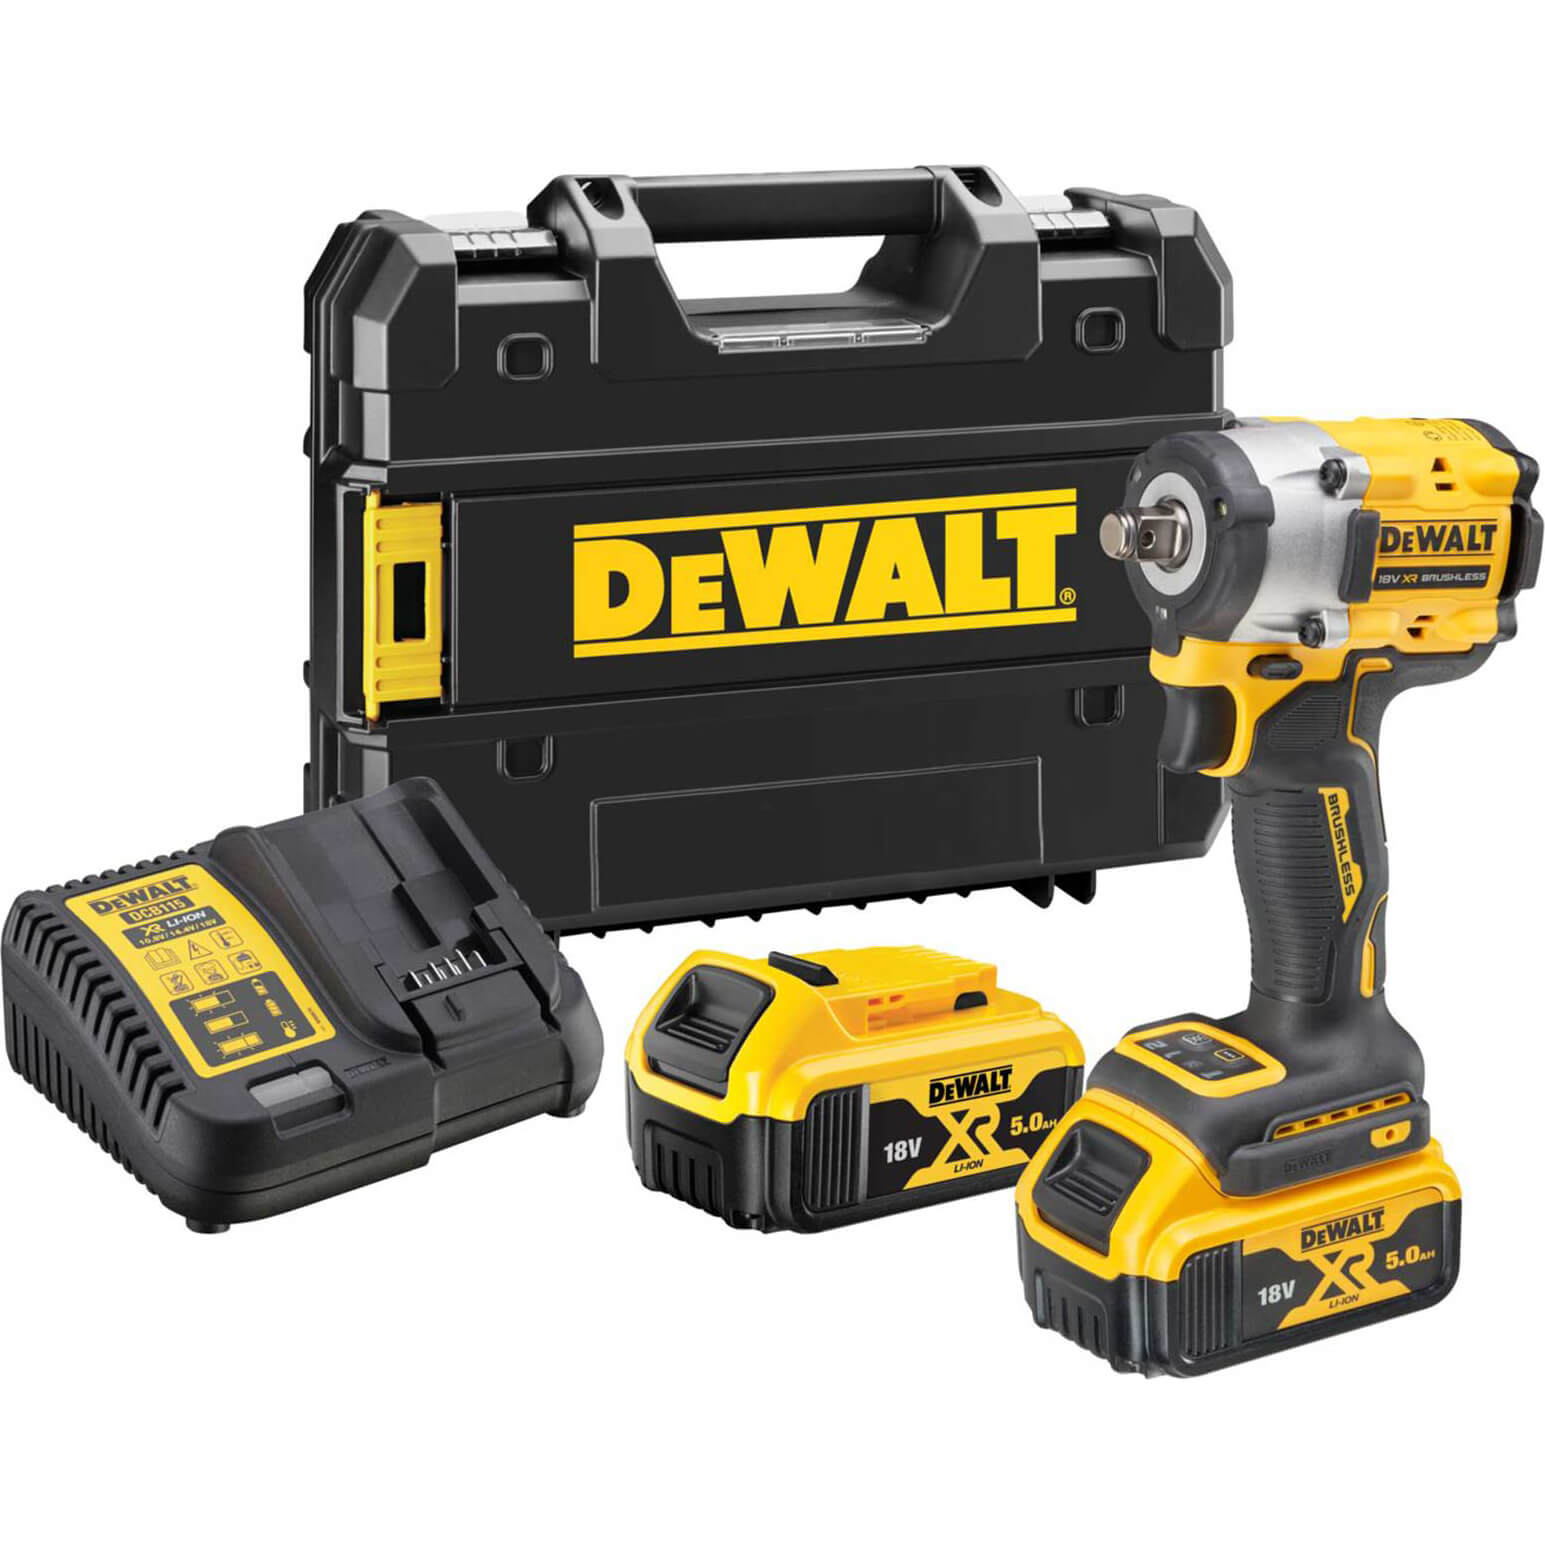 DeWalt DCF921 18v XR Cordless Brushless 1/2" Compact Impact Wrench 2 x 5ah Li-ion Charger Case